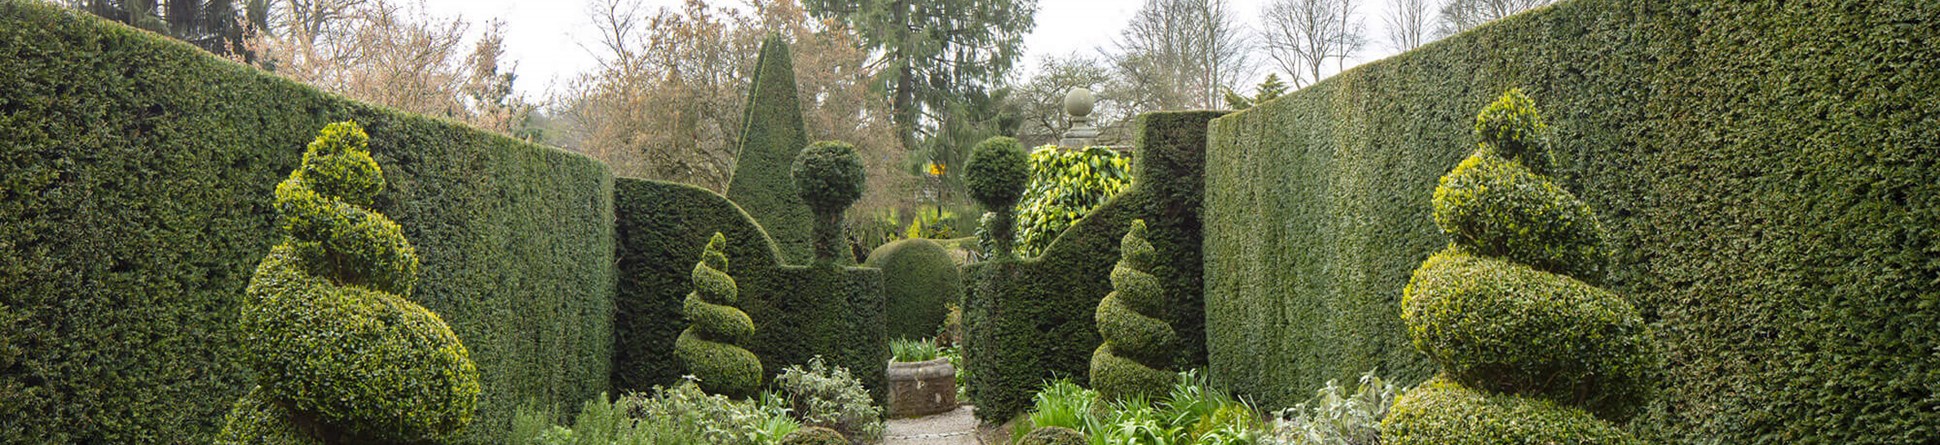 Topiary lining a path with hedging either side